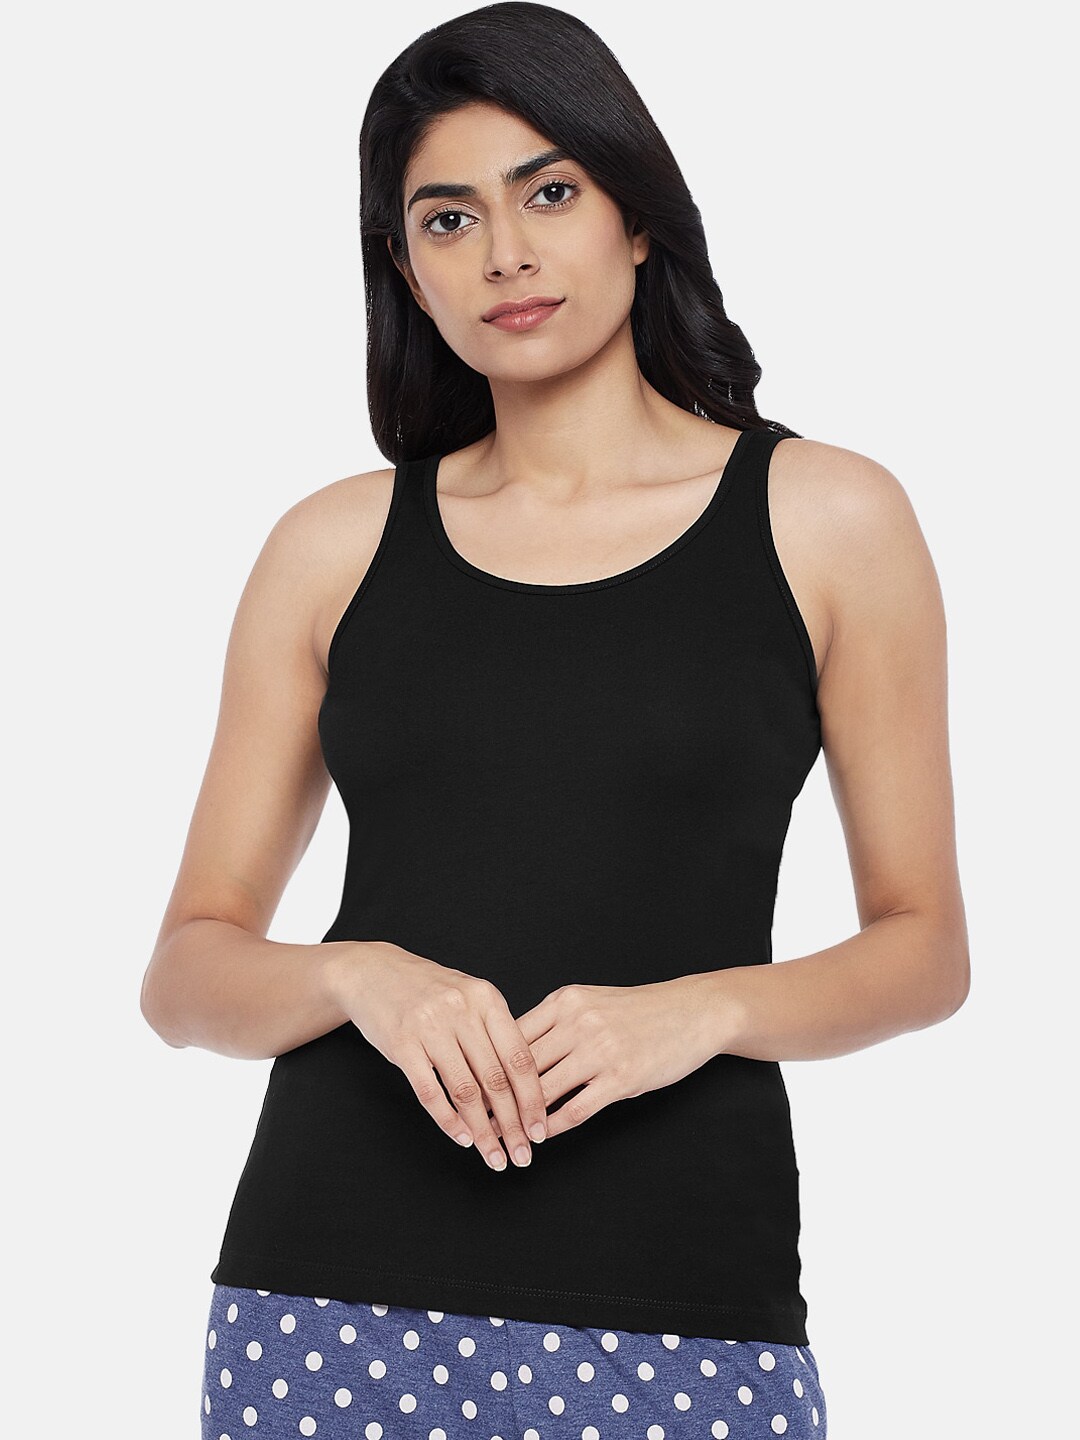 Dreamz by Pantaloons Black Solid Tank Lounge tshirt Price in India